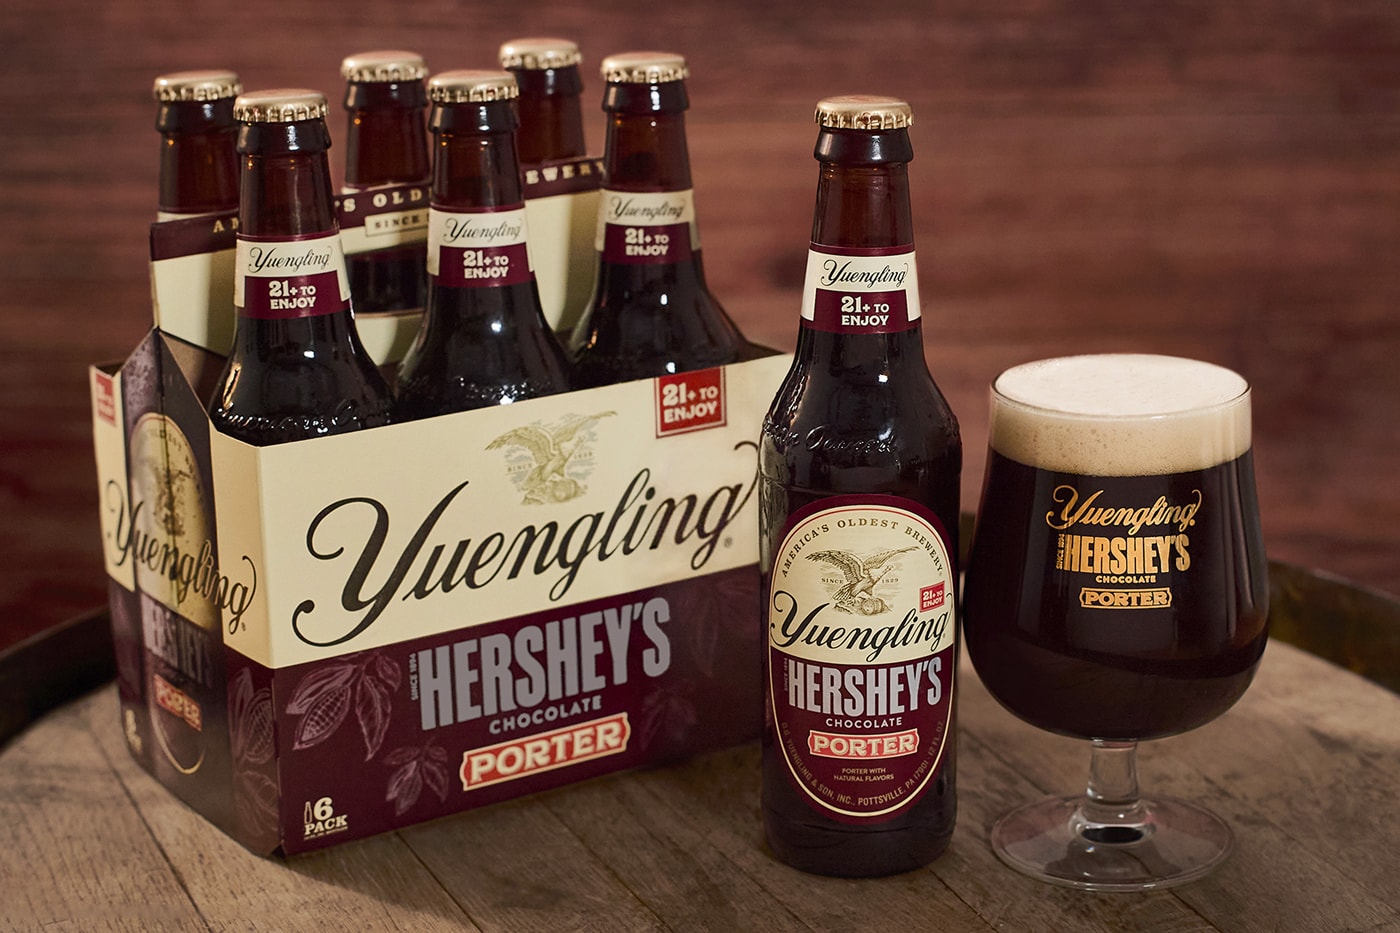 Yuengling Hershey’s Chocolate Porter americas oldest brewery iconic limited edition 200 year old dark brewed #1 craft brewery 180 calories. 